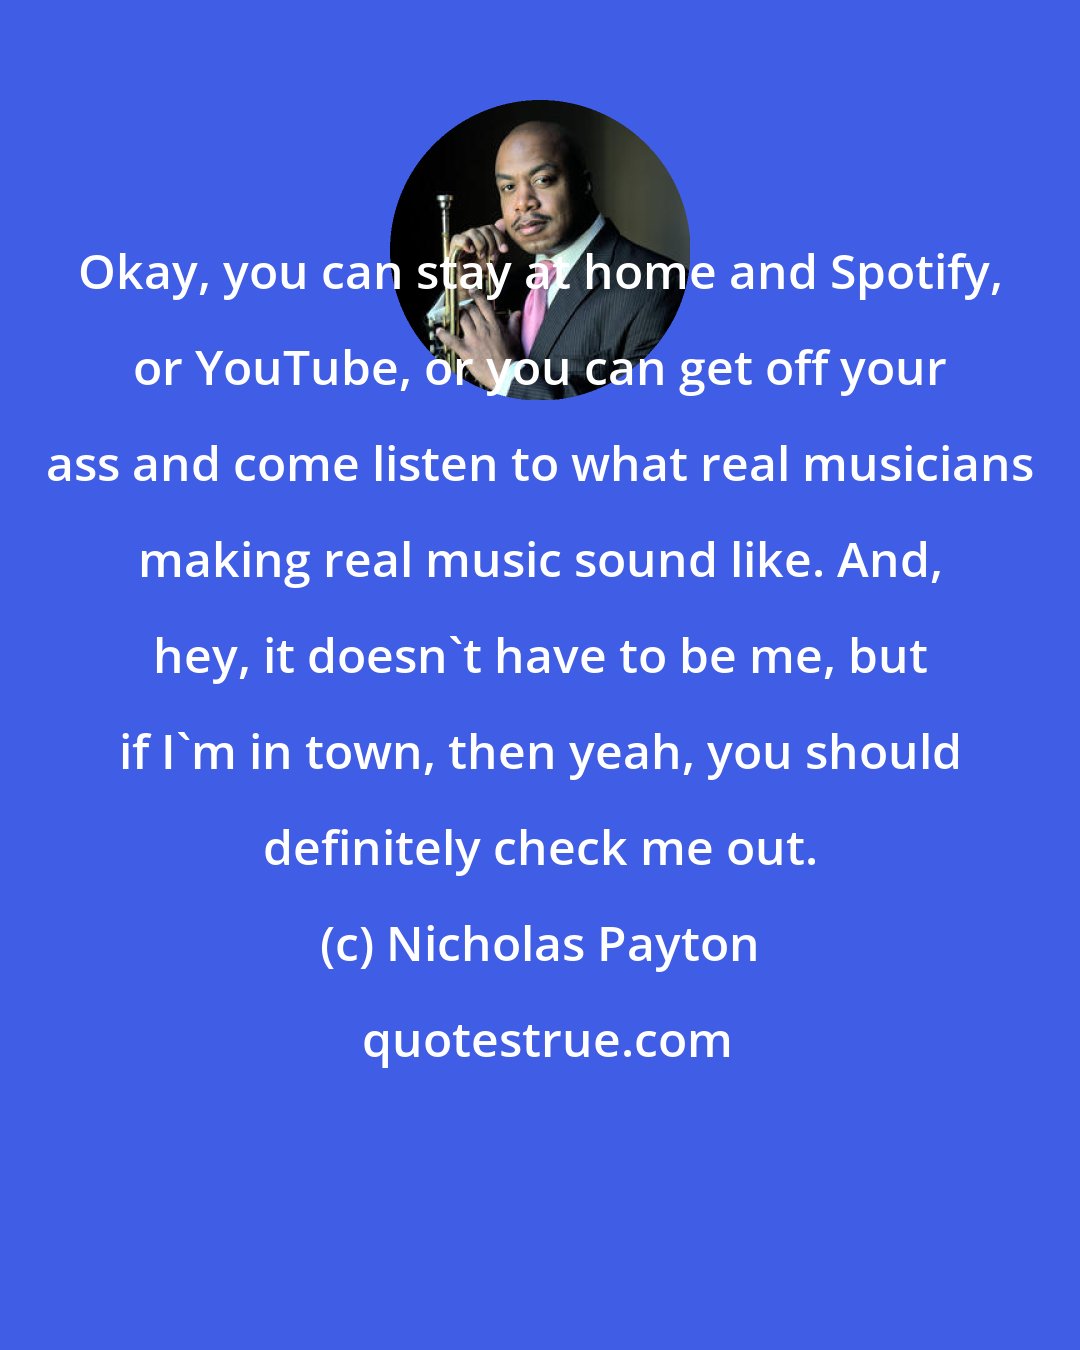 Nicholas Payton: Okay, you can stay at home and Spotify, or YouTube, or you can get off your ass and come listen to what real musicians making real music sound like. And, hey, it doesn't have to be me, but if I'm in town, then yeah, you should definitely check me out.